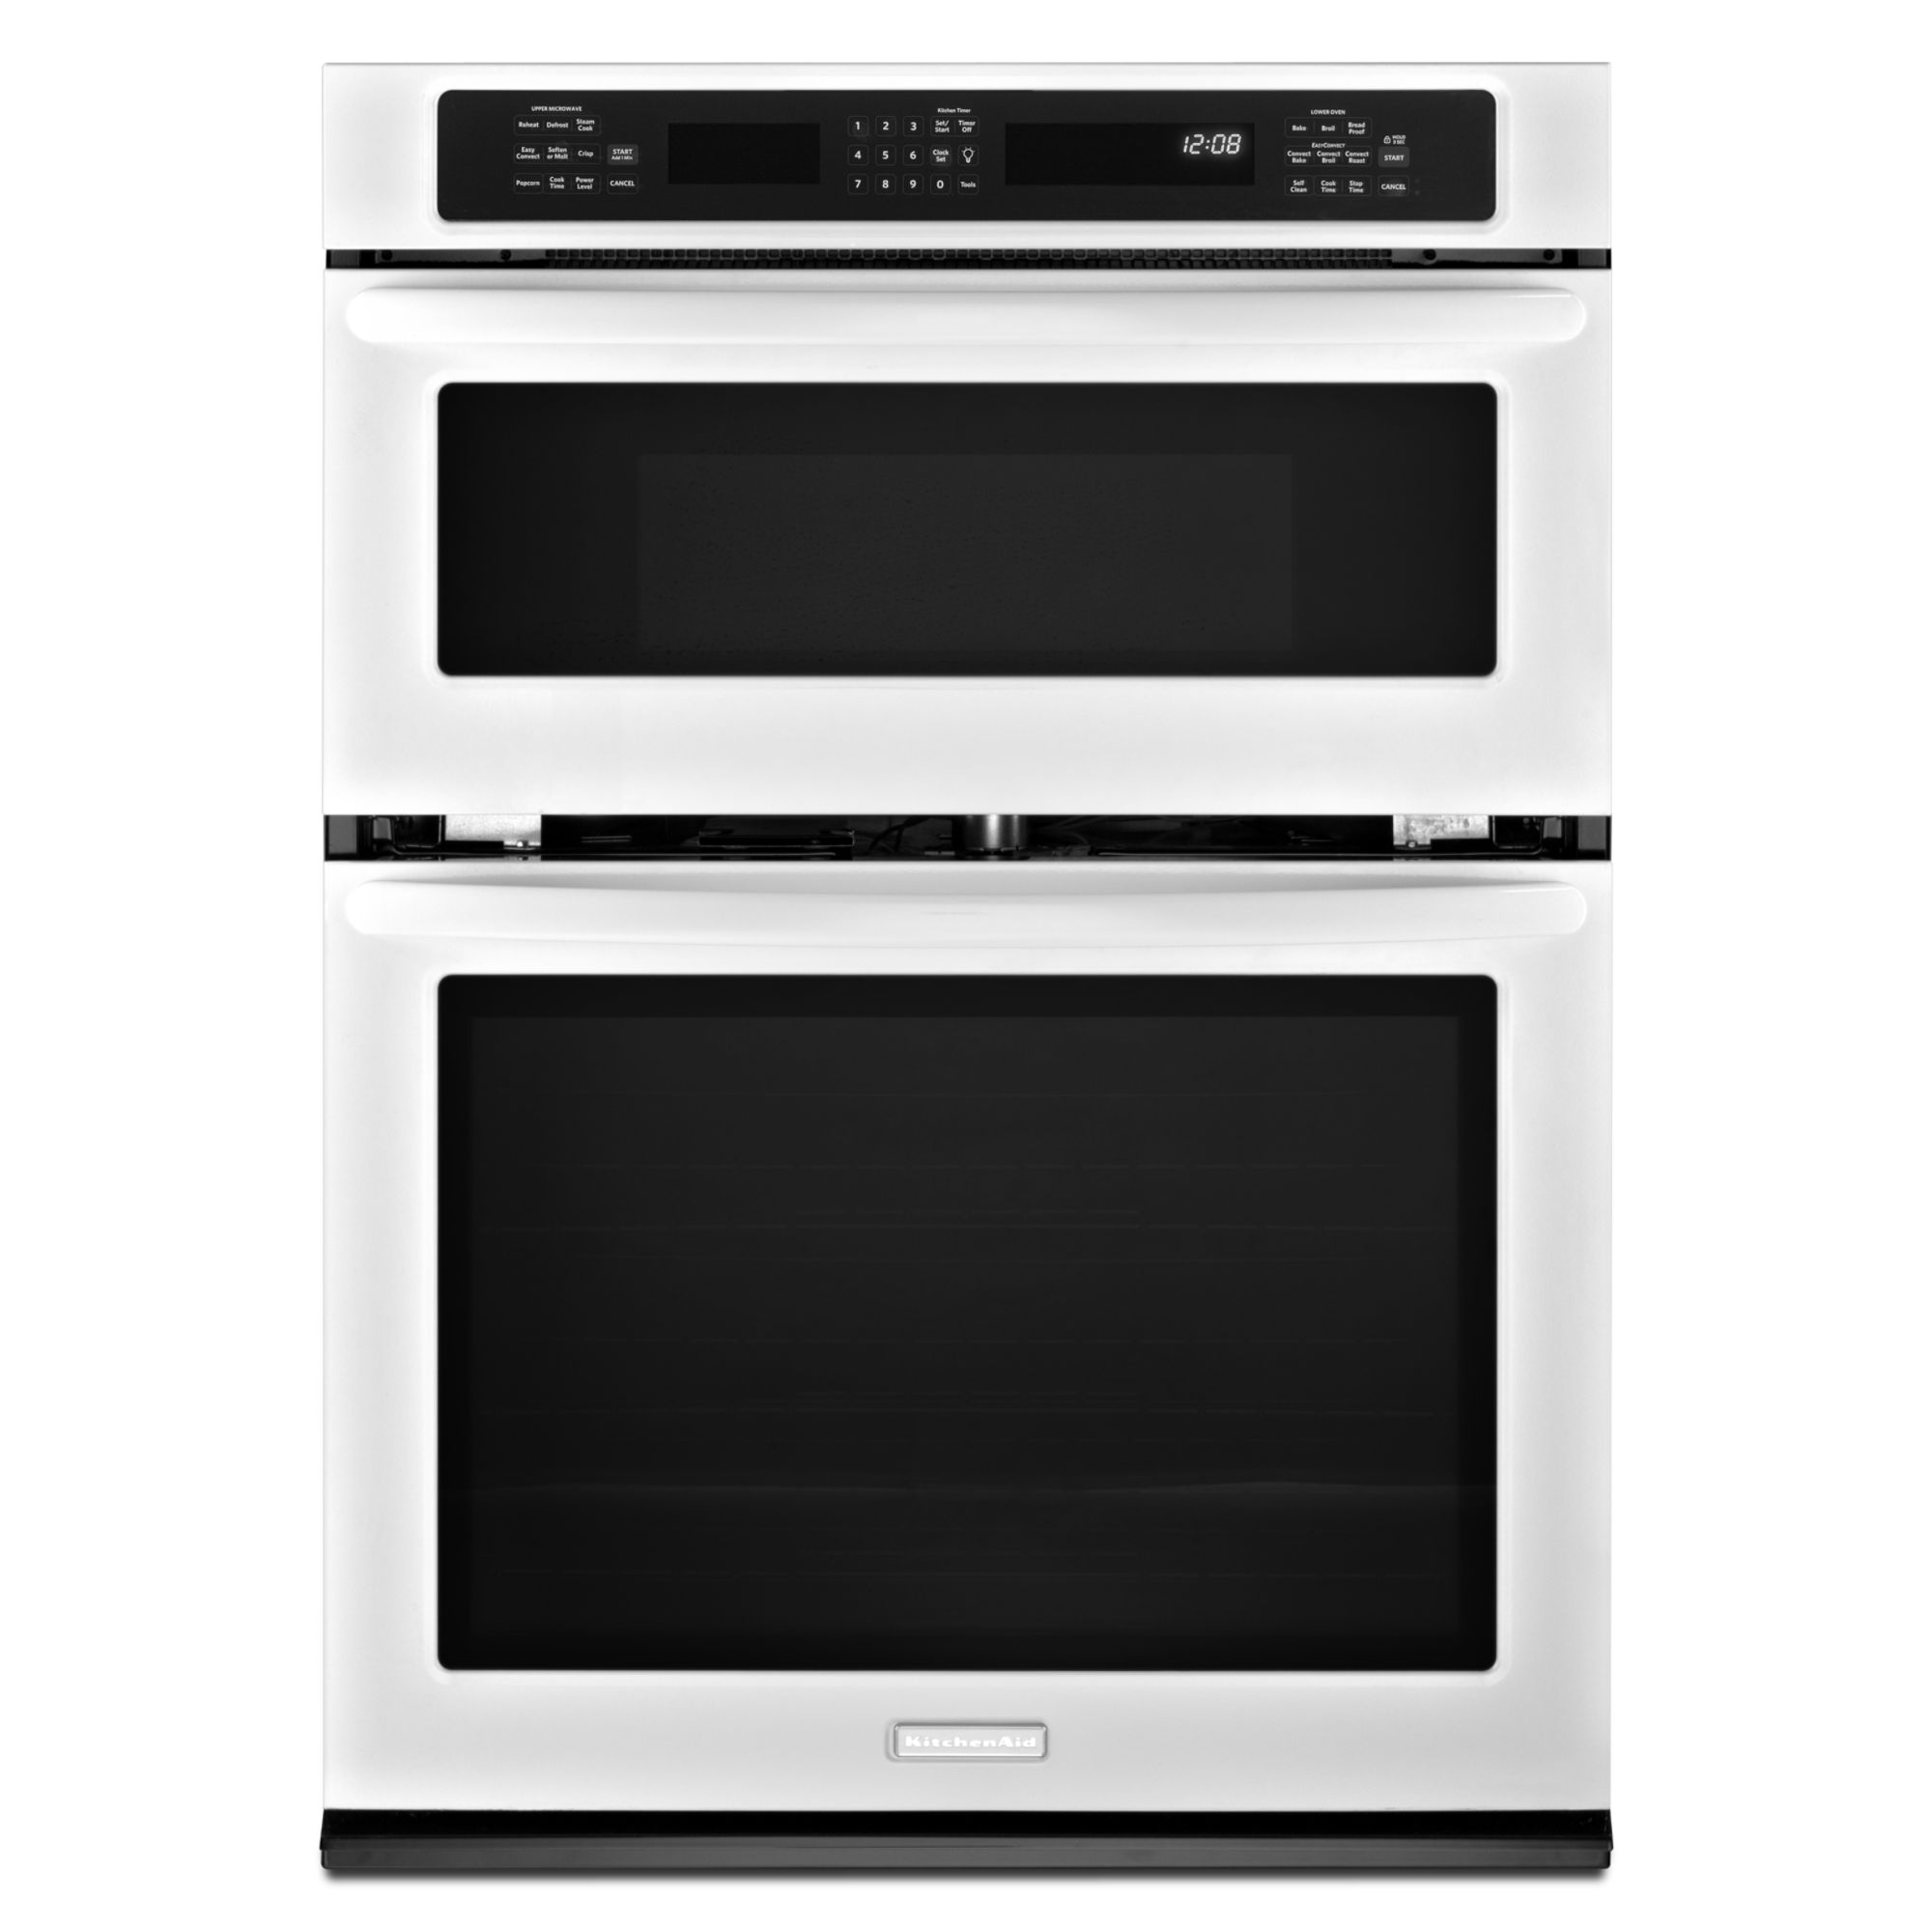 KitchenAid 27 Built-In Combination Wall Oven w/ Even-Heat True Convection Lower Oven - White